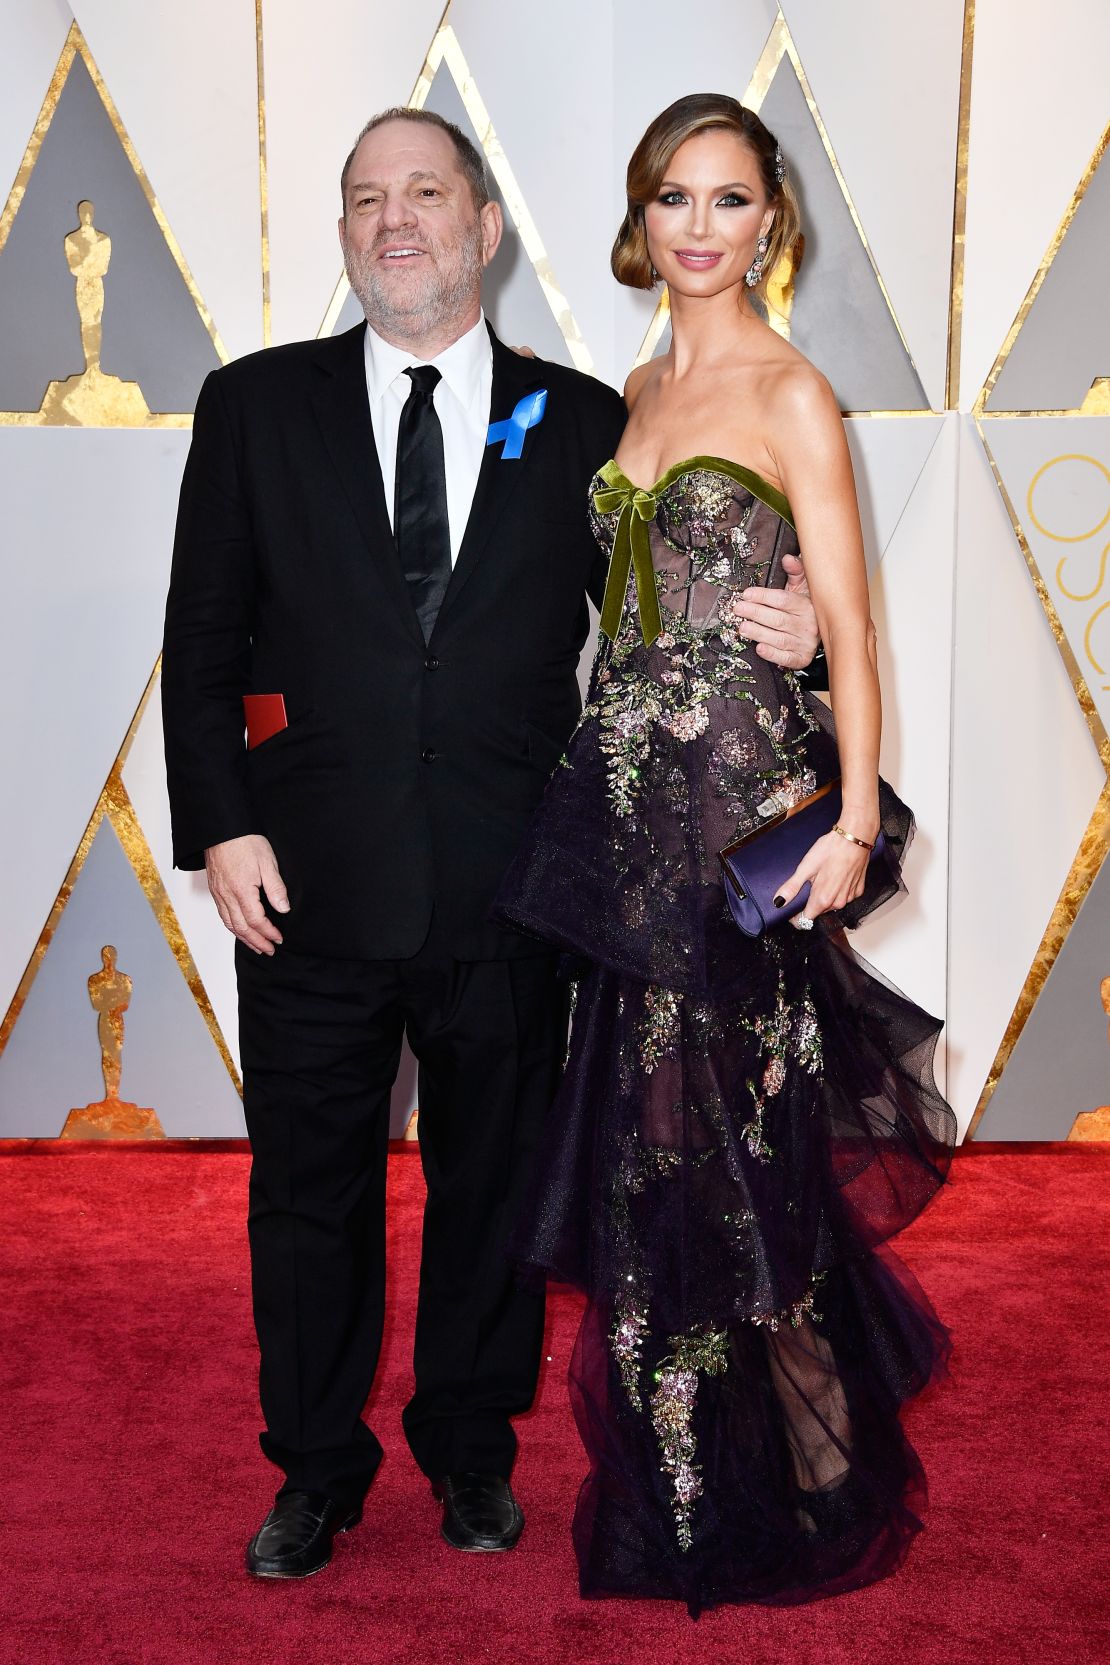 Georgina Chapman (R) pictured with husband Harvey Weinstein at the 2017 Oscars.